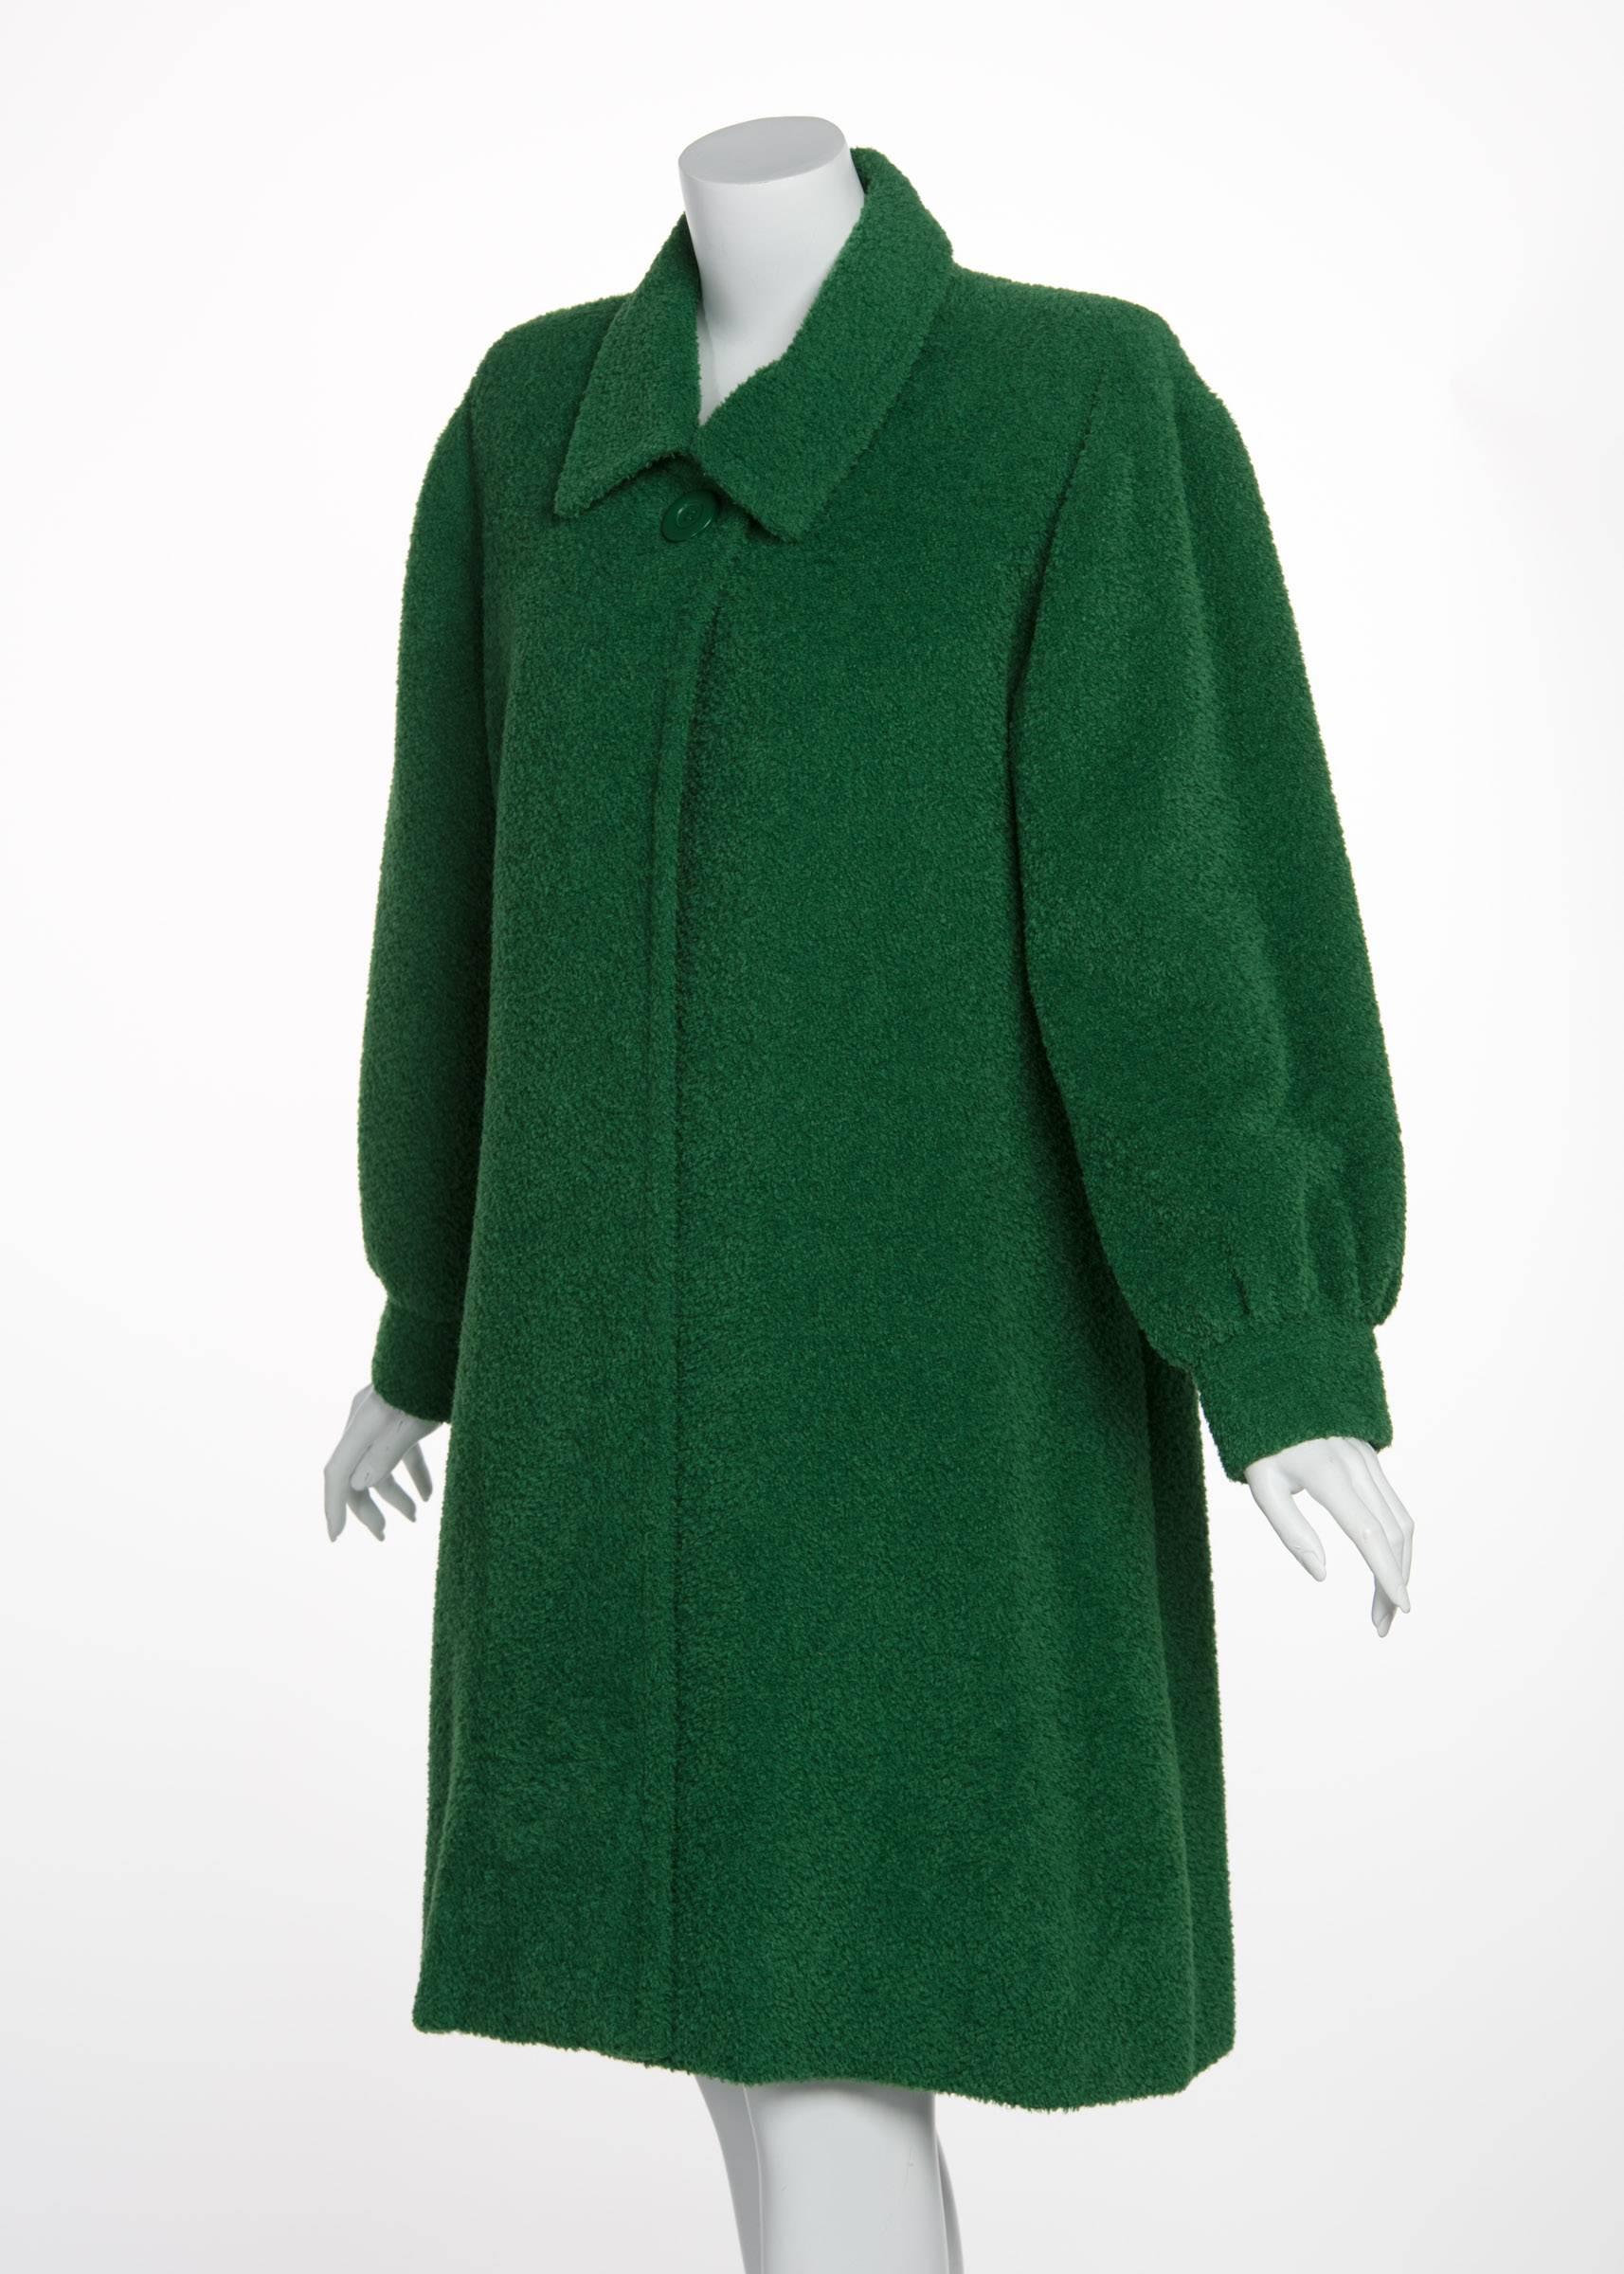 Fall/ Winter Givenchy Haute Couture Green Textured Wool Coat, 1995 In Excellent Condition In Boca Raton, FL